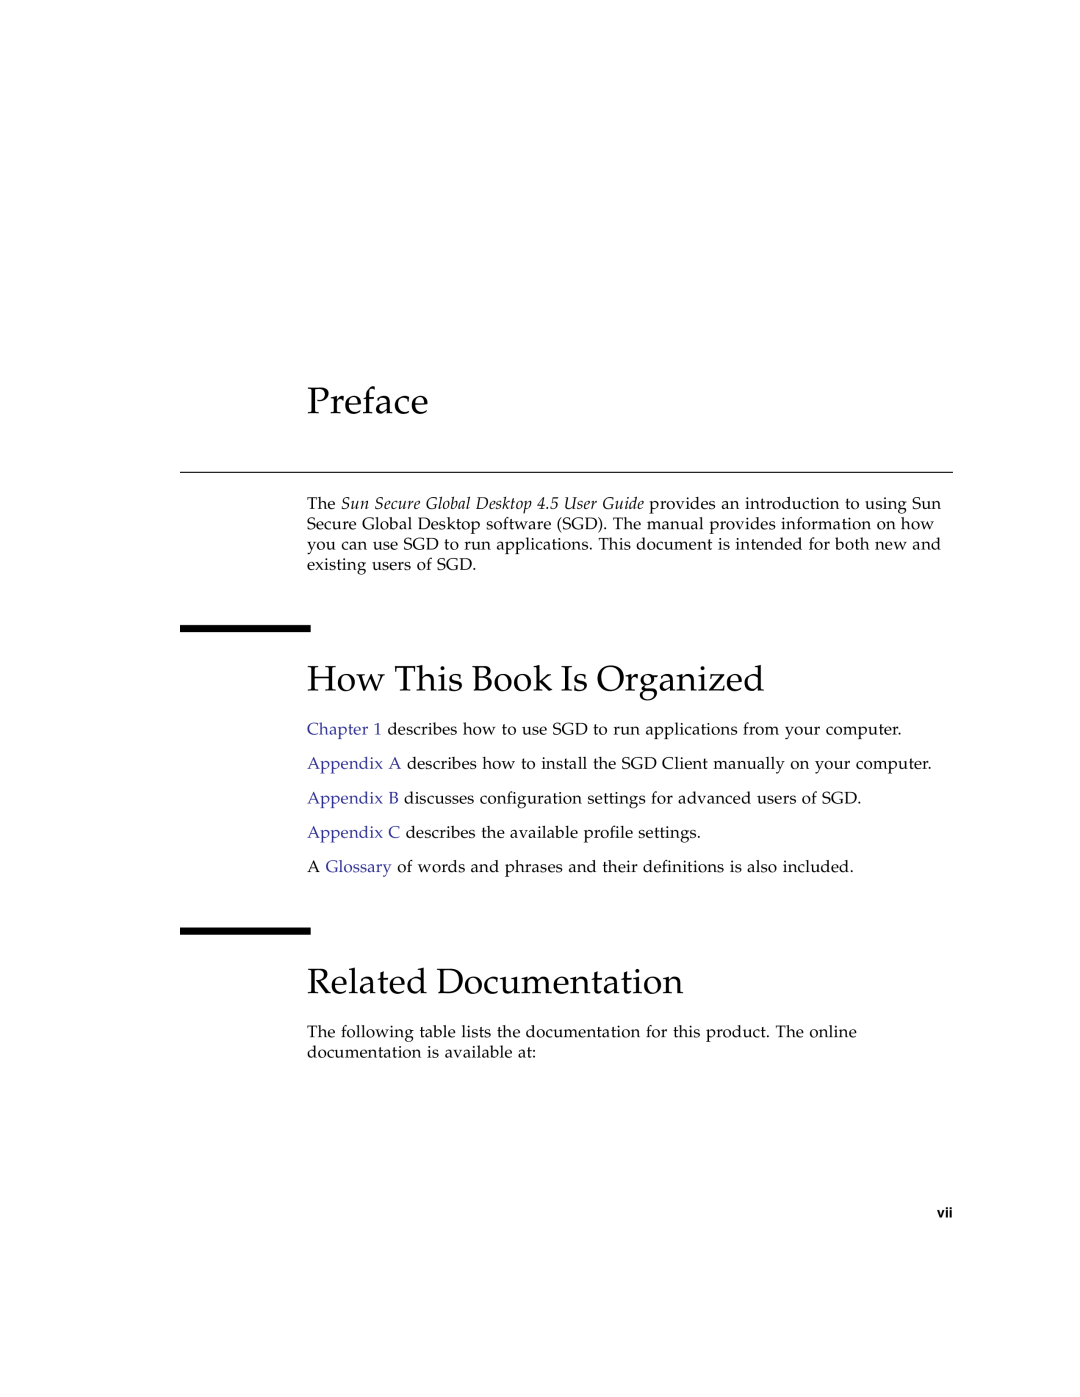 Sun Microsystems 4.5 manual Preface, How This Book Is Organized, Related Documentation 